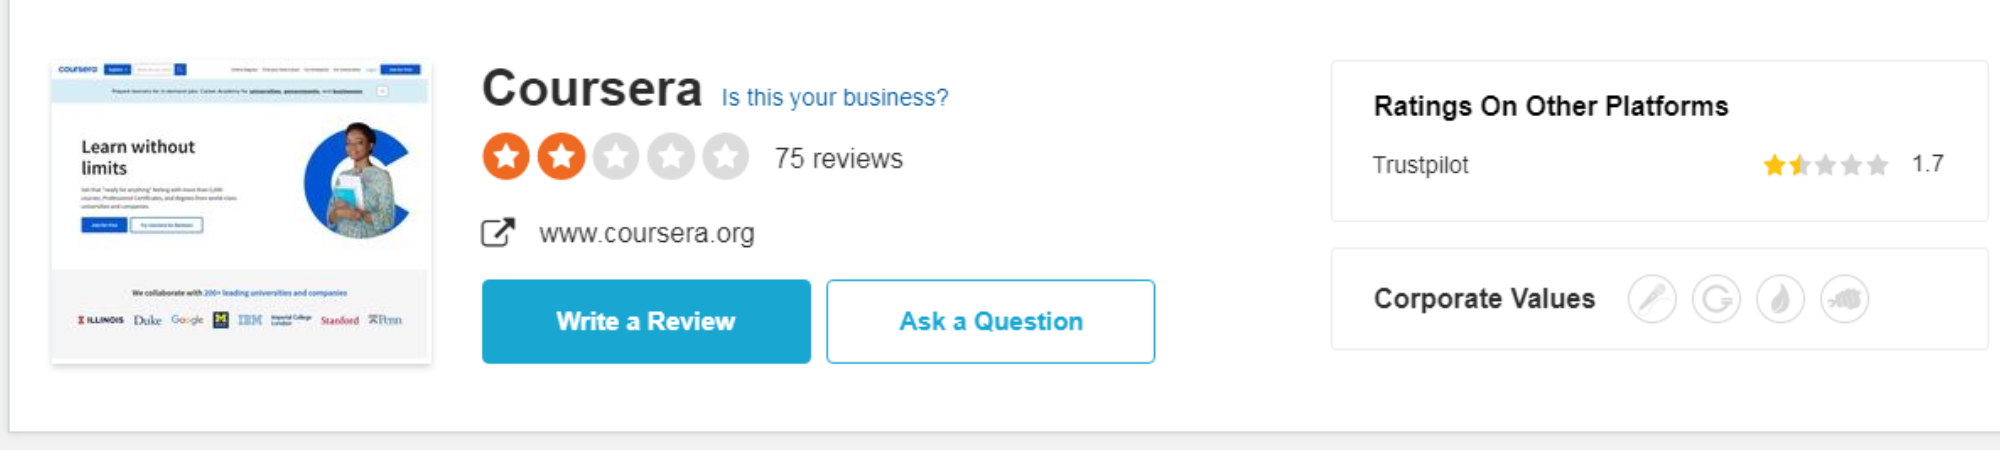 Coursera Reviews on SiteJabber